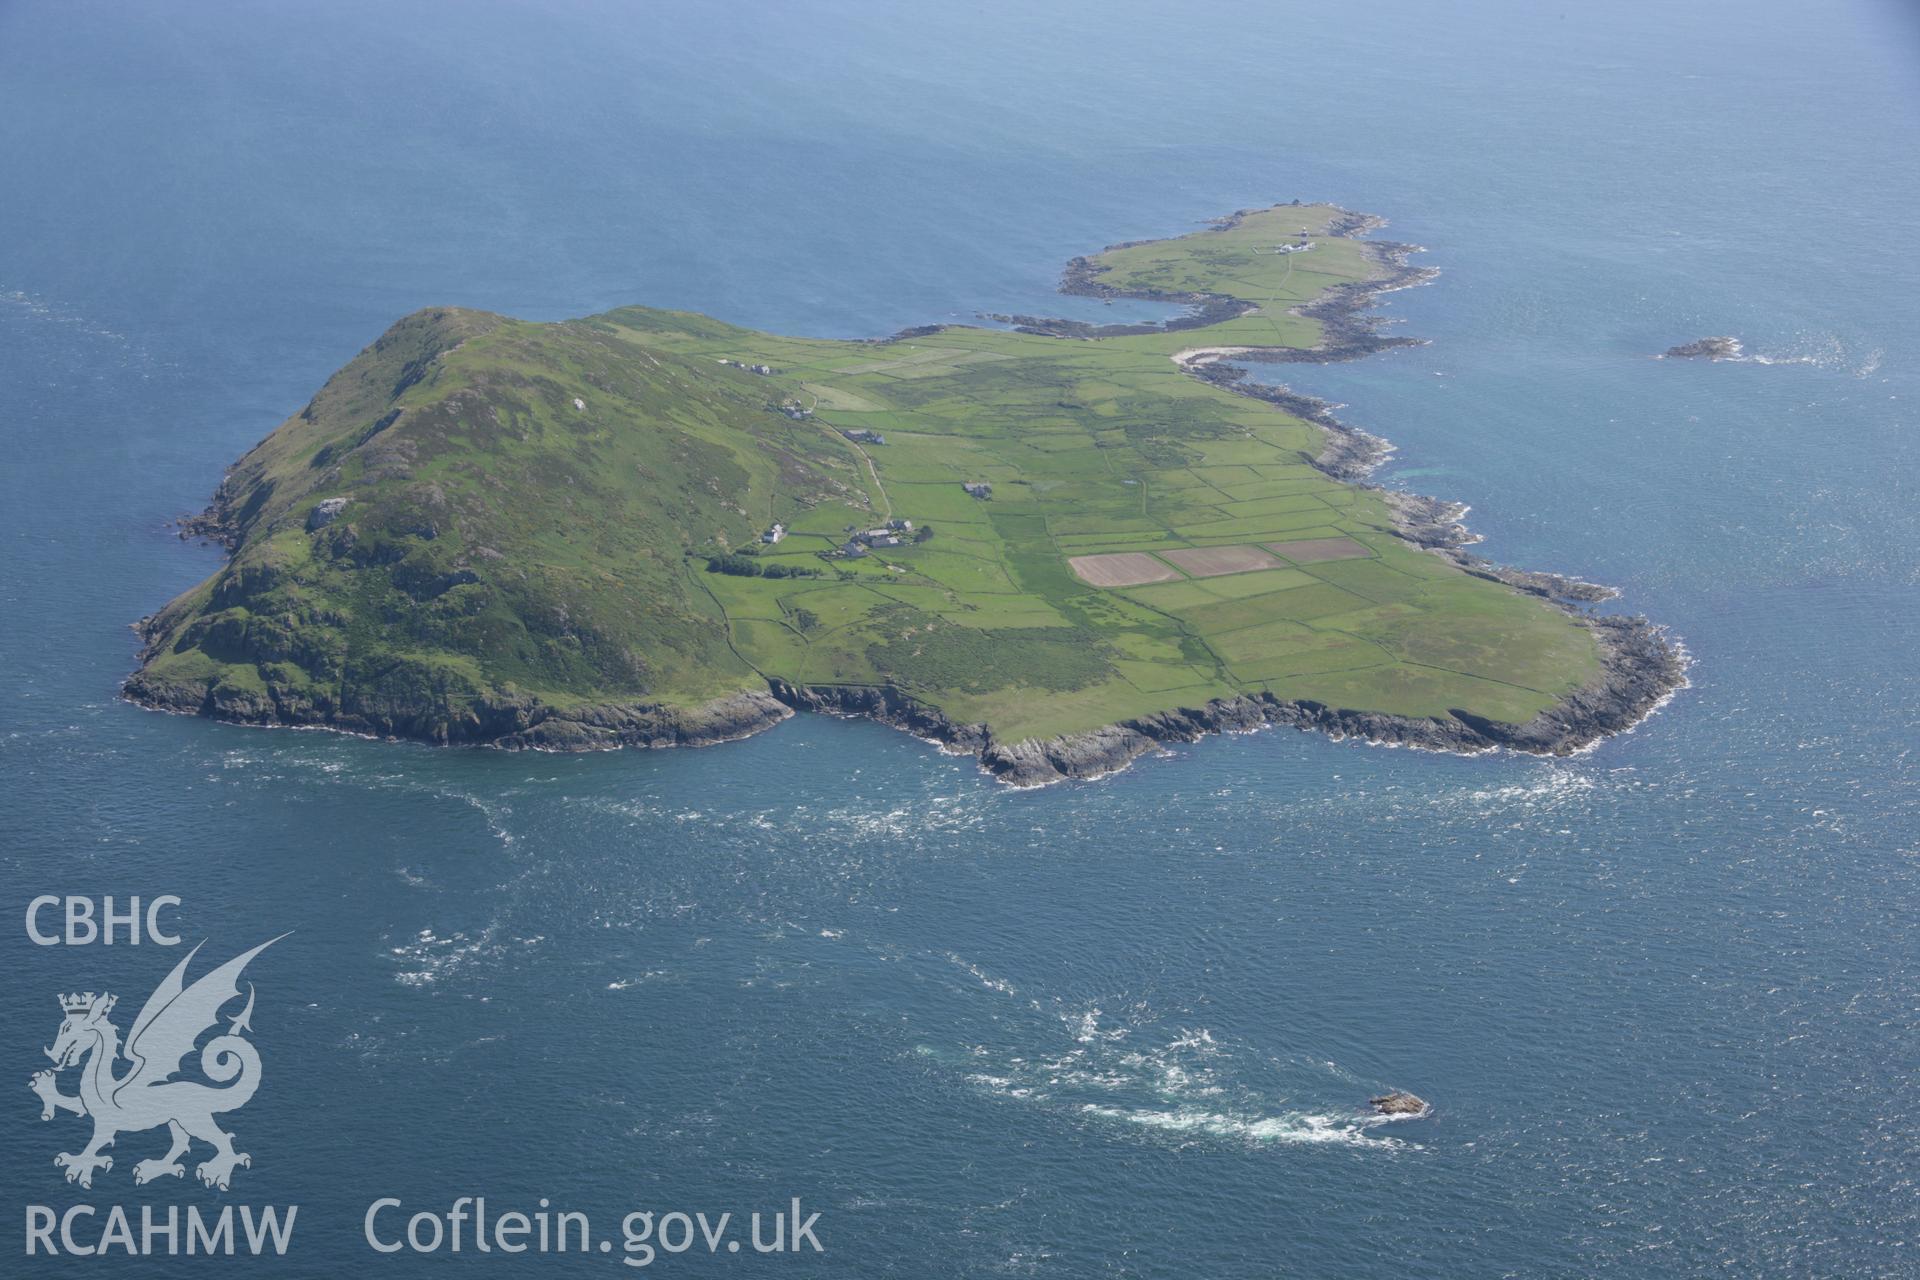 RCAHMW colour oblique aerial photograph of Bardsey Island (Ynys Enlli) from the north-west. Taken on 14 June 2006 by Toby Driver.